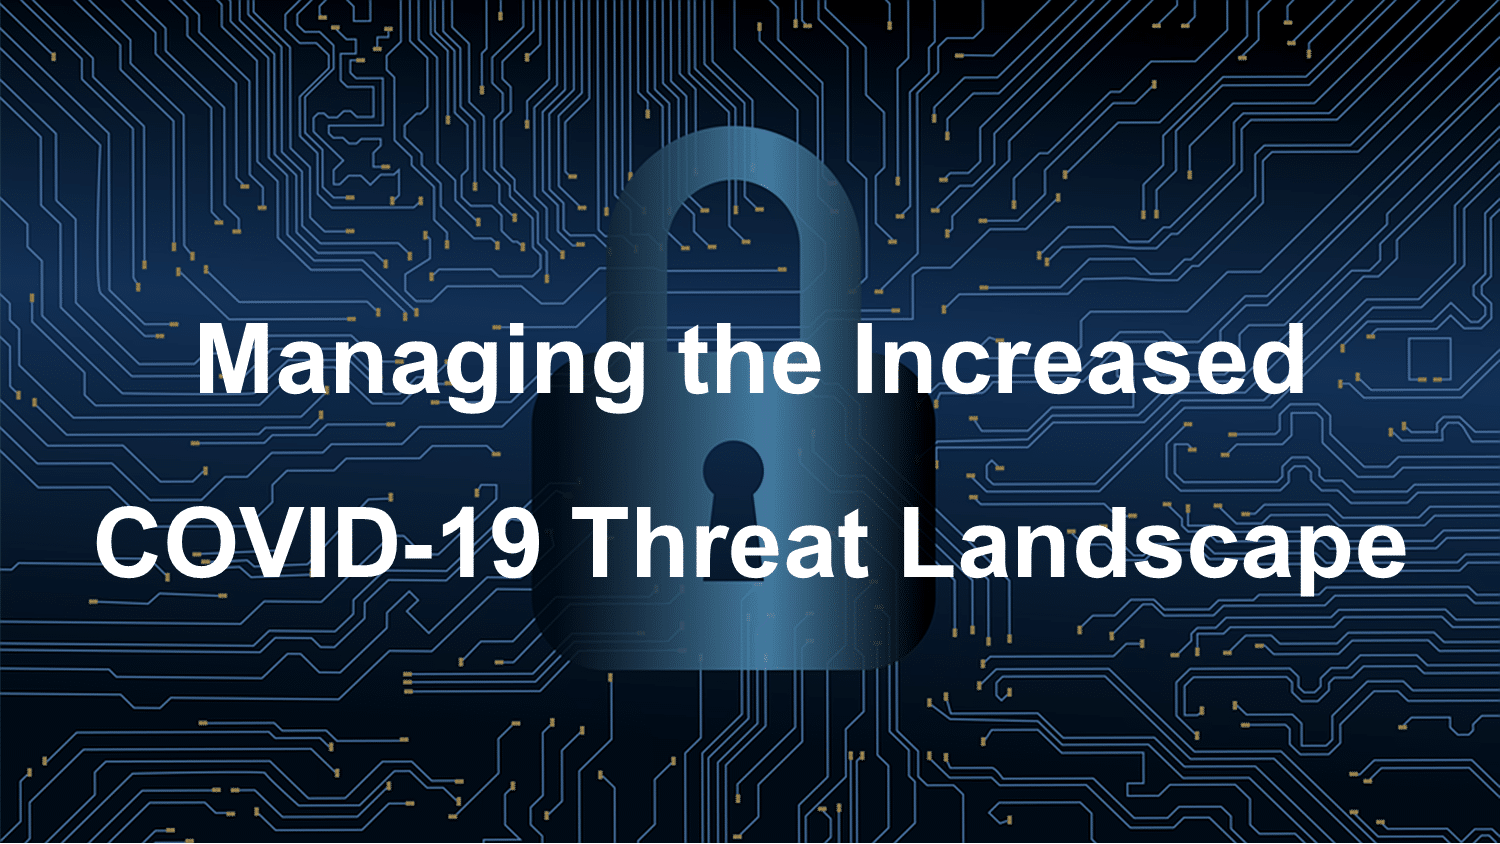 Managing the Increased COVID-19 Threat Landscape